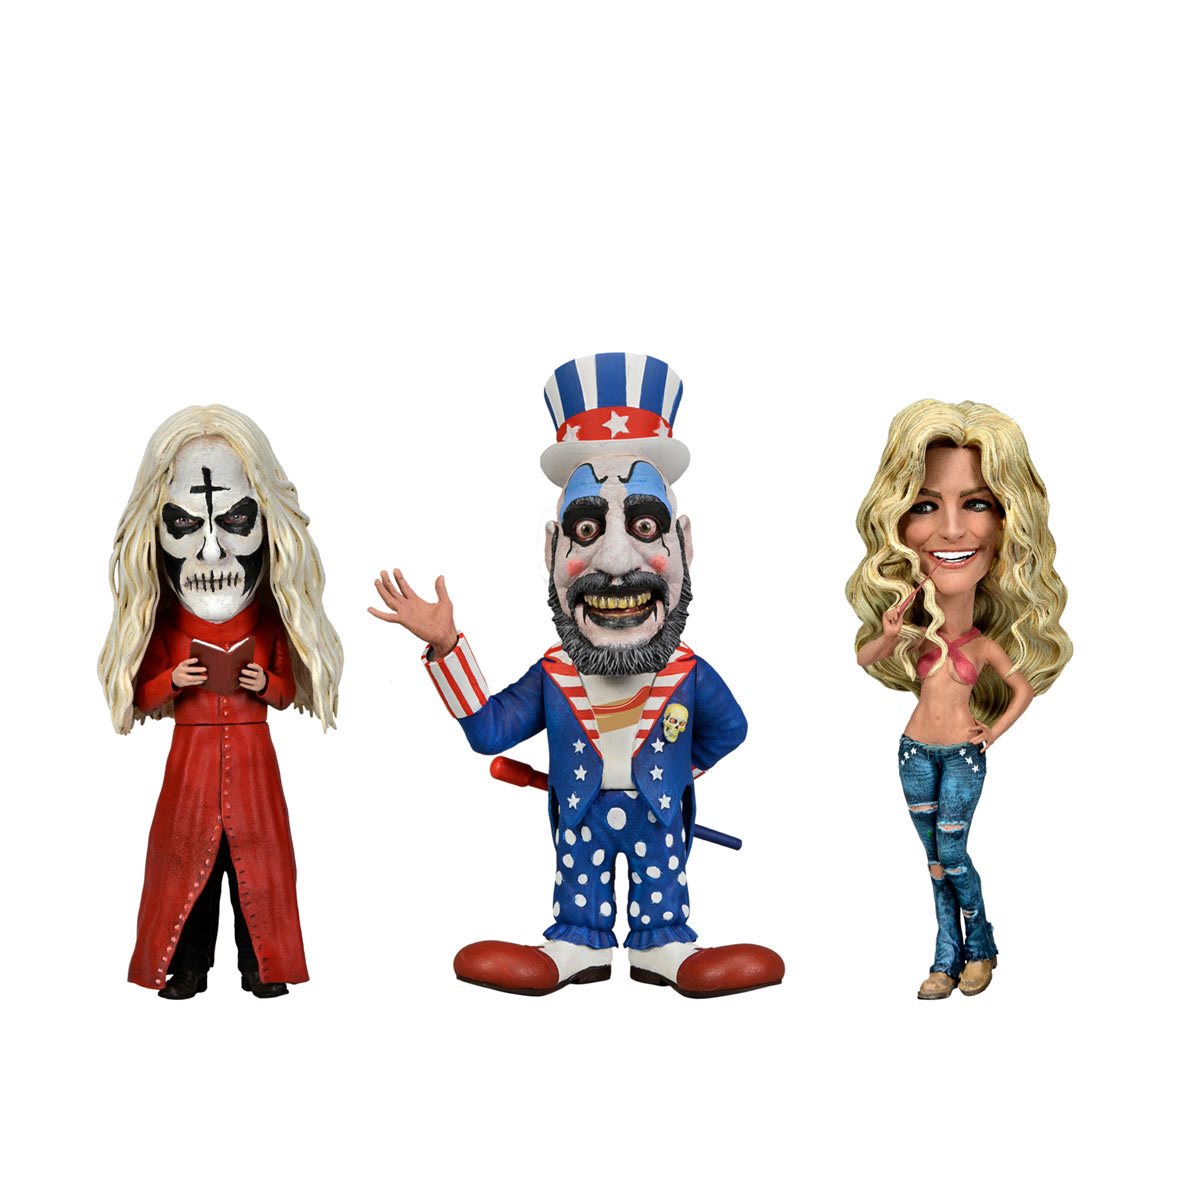 NECA- House of 1000 Corpses Little Big Head Stylized Vinyl Figures 3-Pack